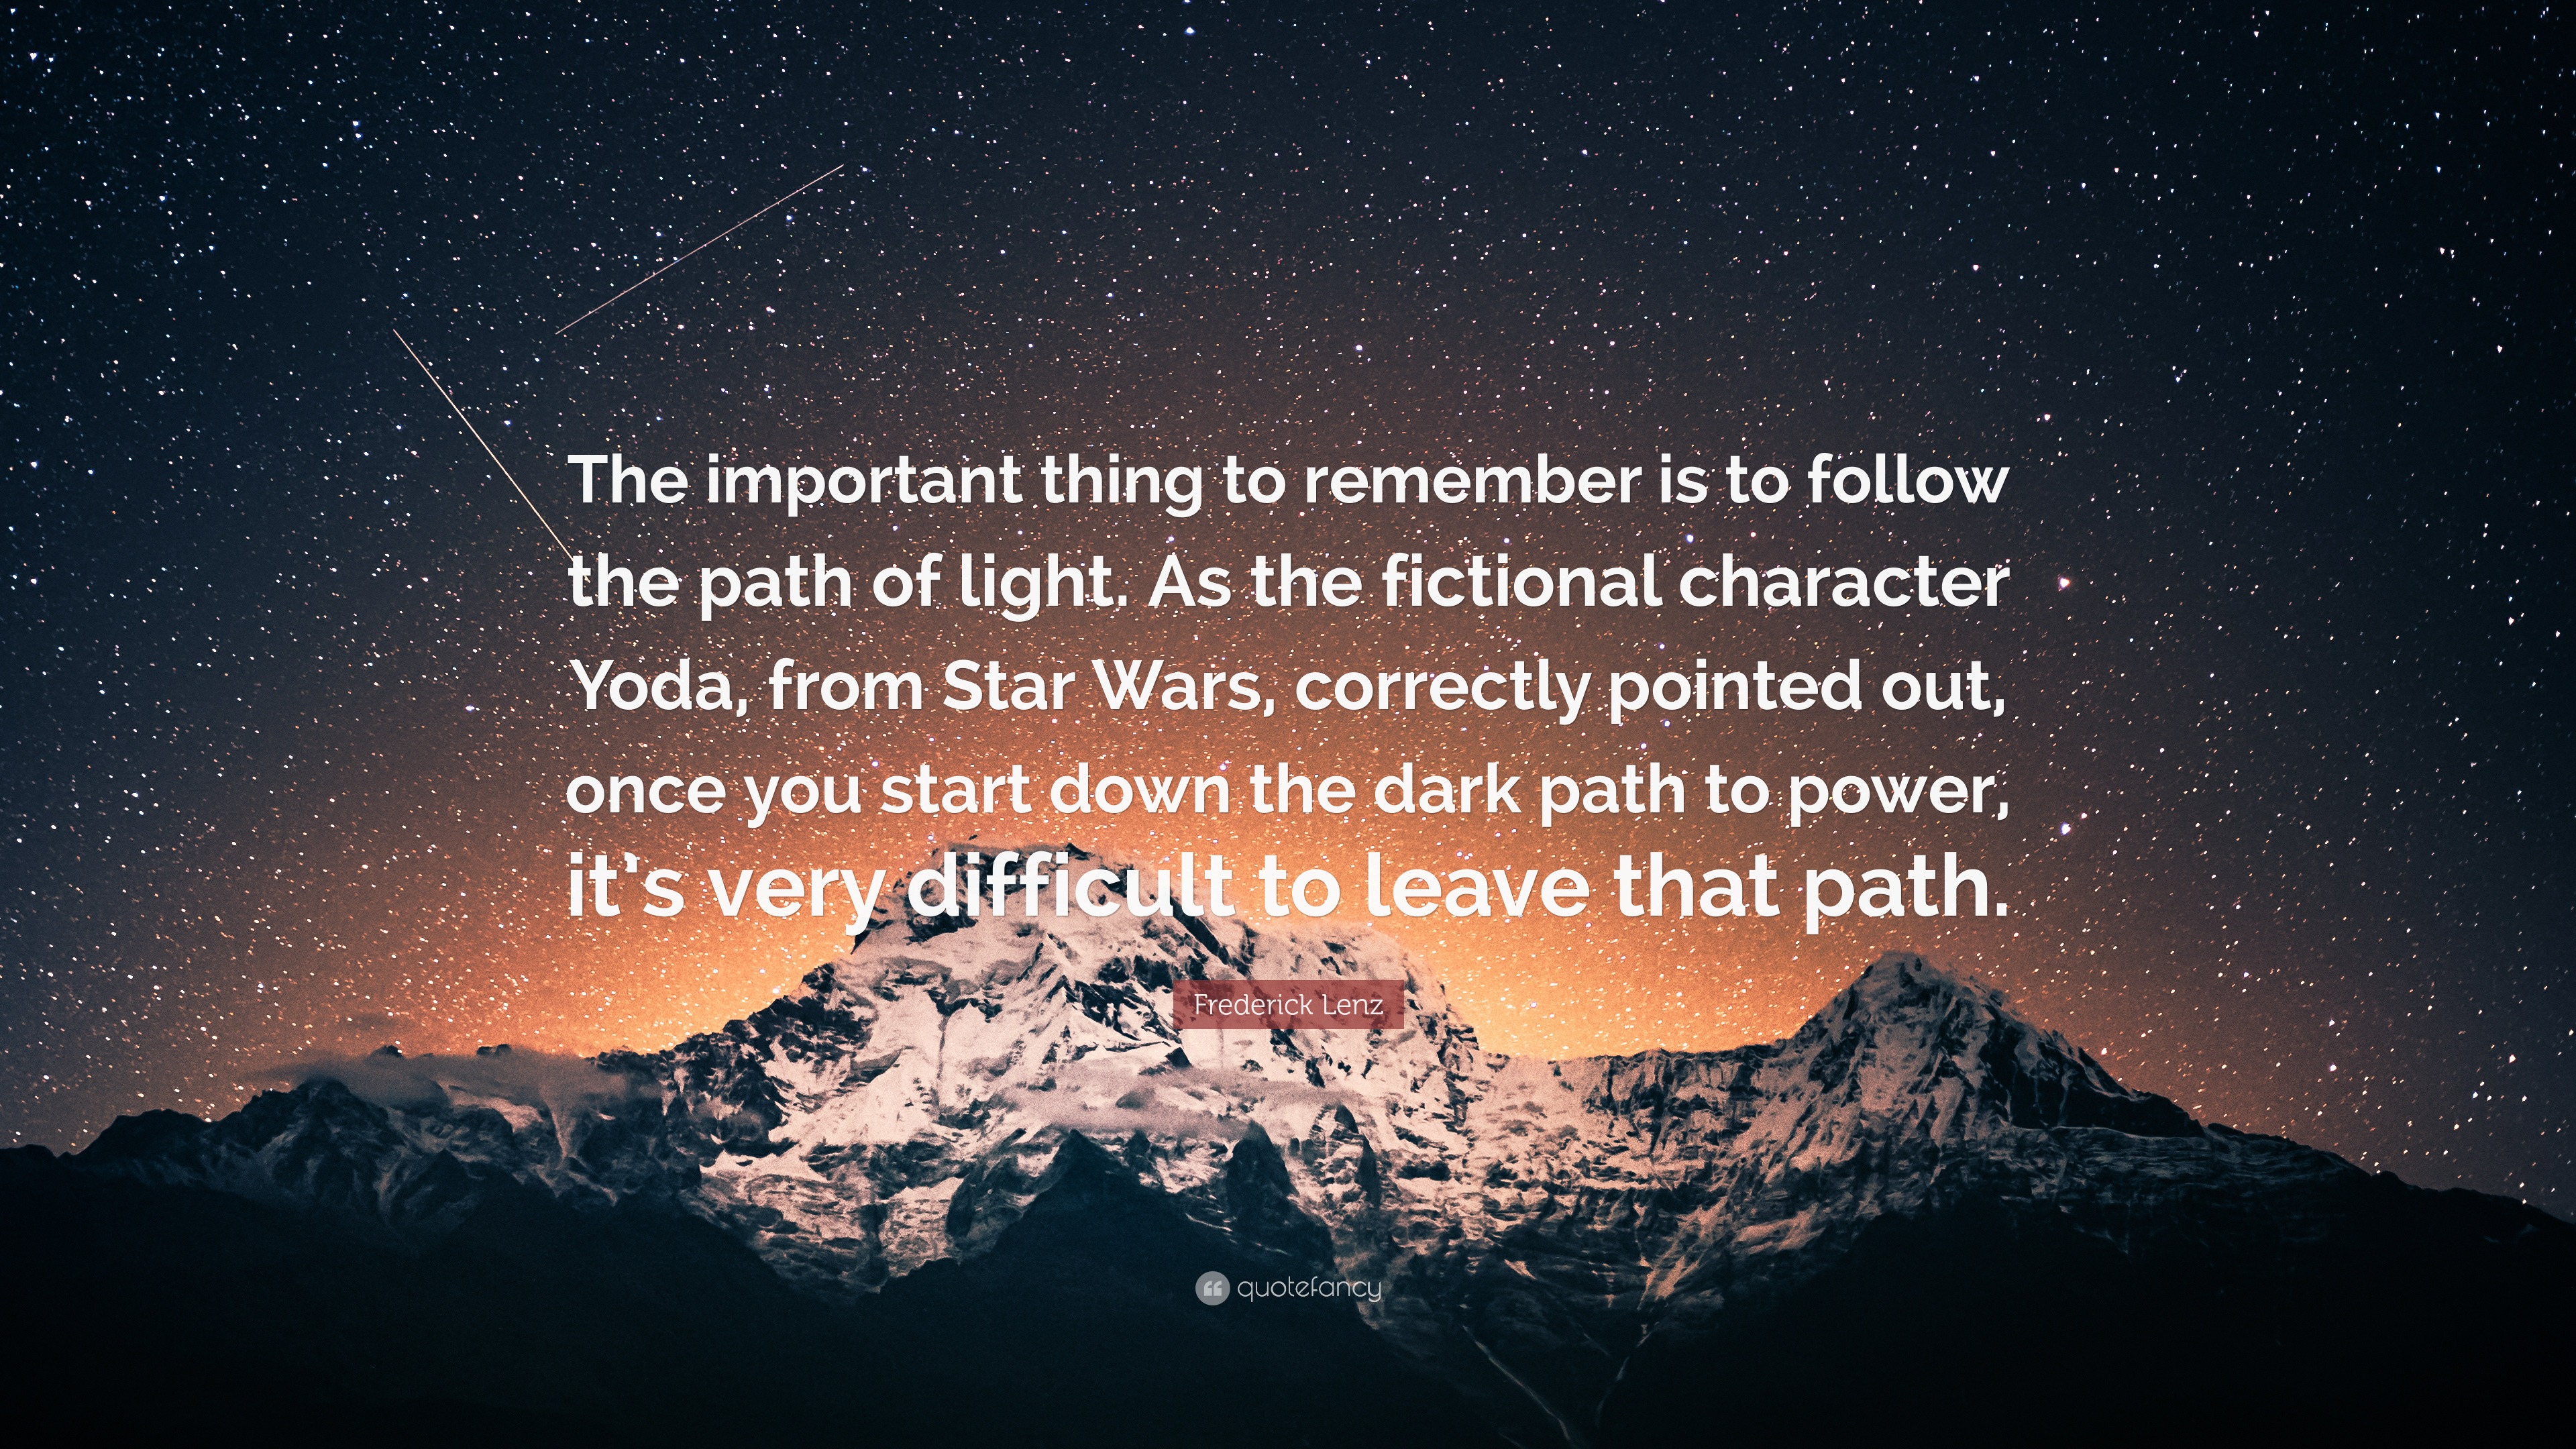 Frederick Lenz Quote: “The important thing to is to follow the path of light. As the fictional character Yoda, from Star Wars, correct...”